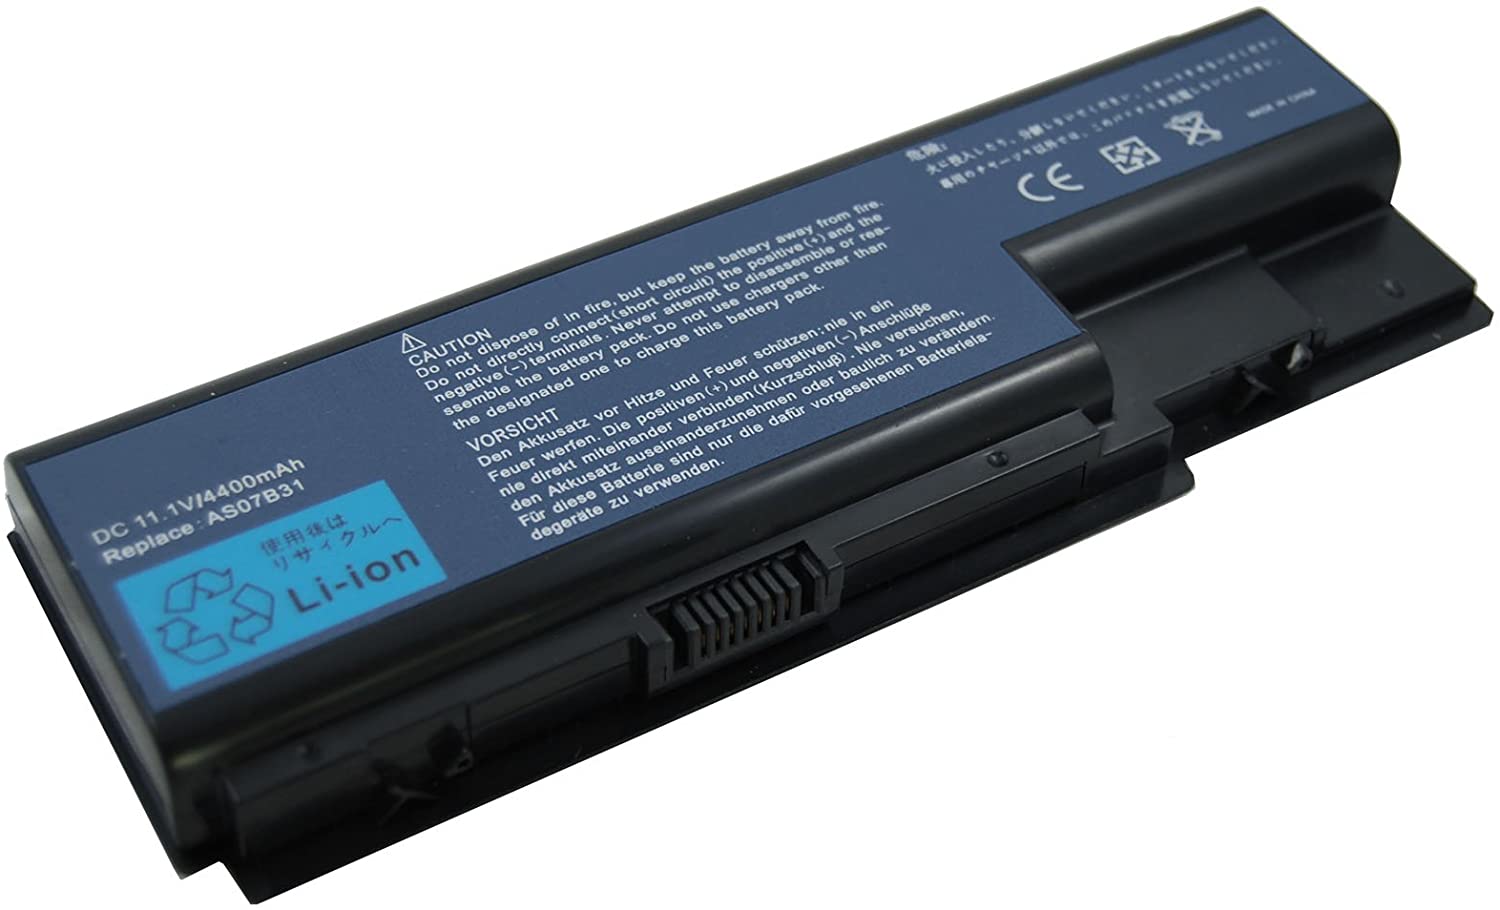 Replacement Laptop Battery For Acer Aspire 5220 5230 5235 7230 5300 5310 5315 5320 5330 AS07B31